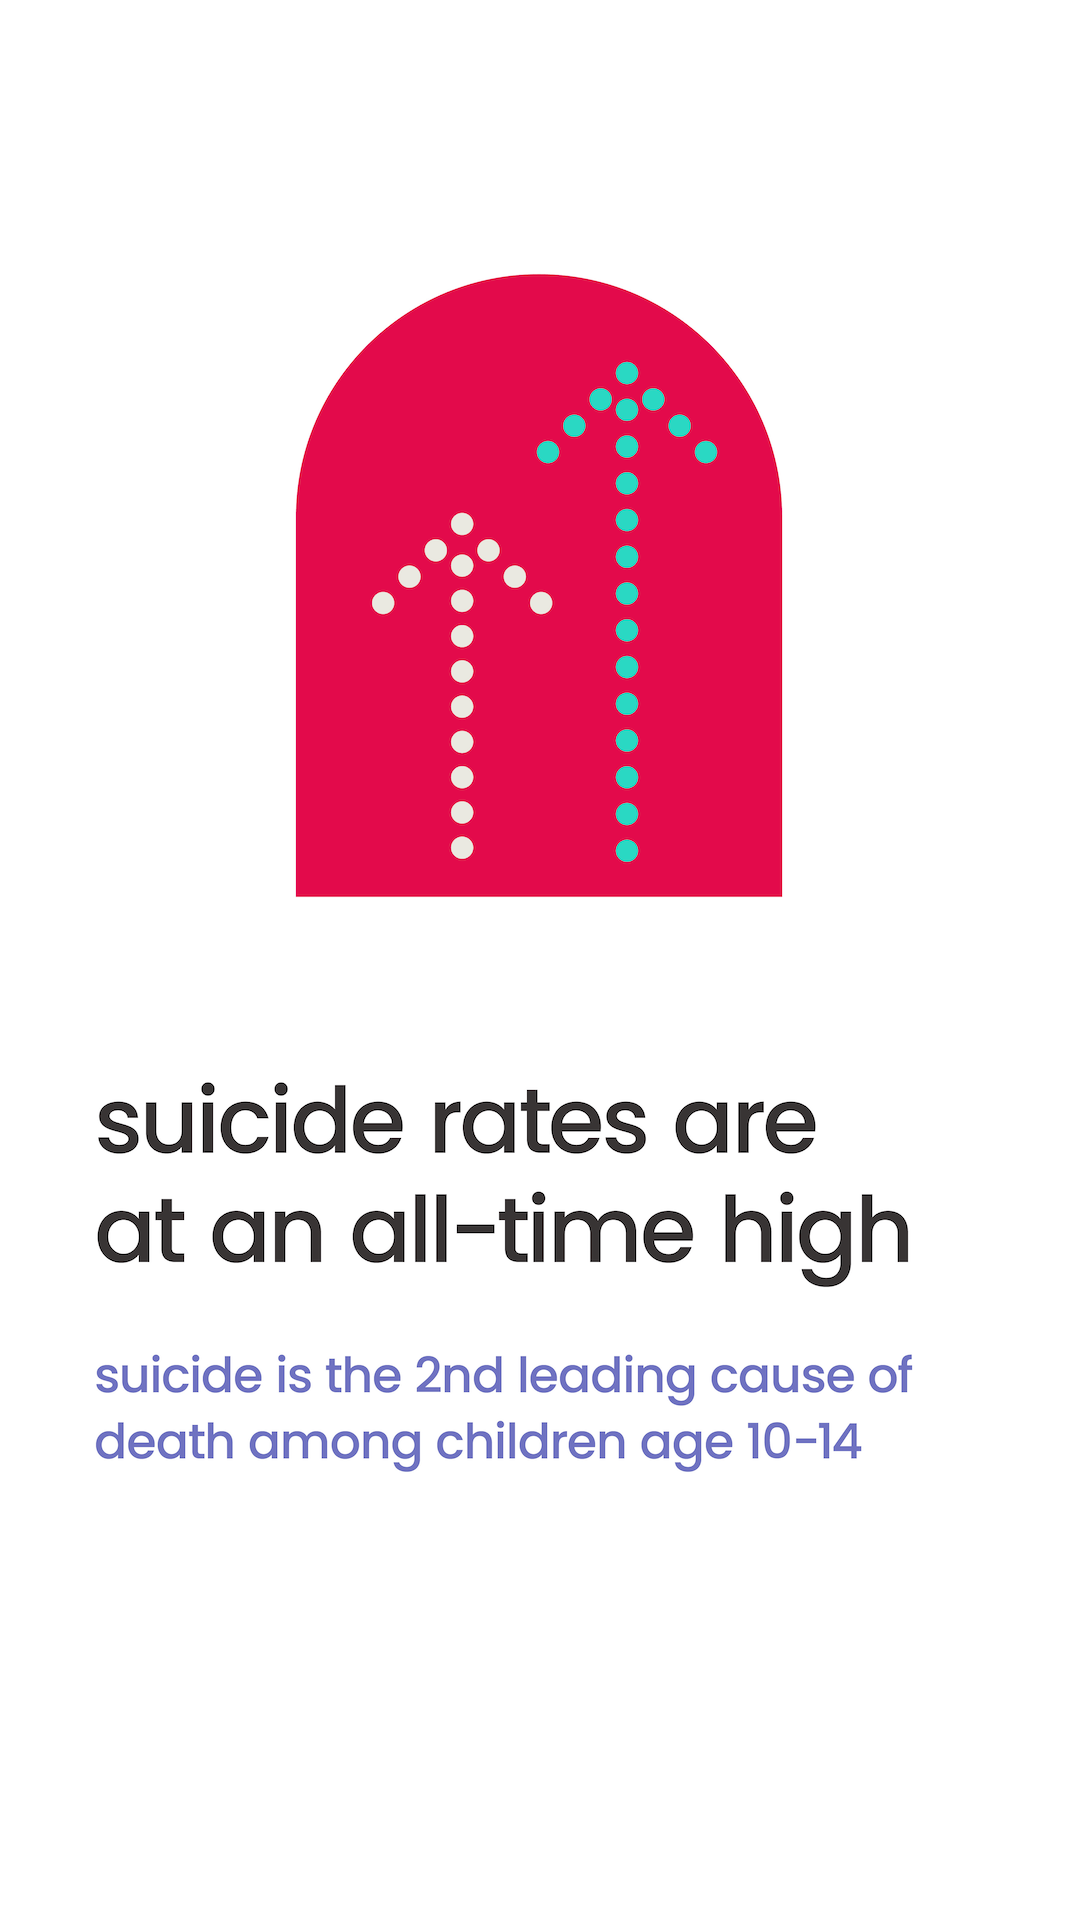 Suicide rates re at an all-time high. Suicide is the 2nd leading cause of death among children age 10-14.